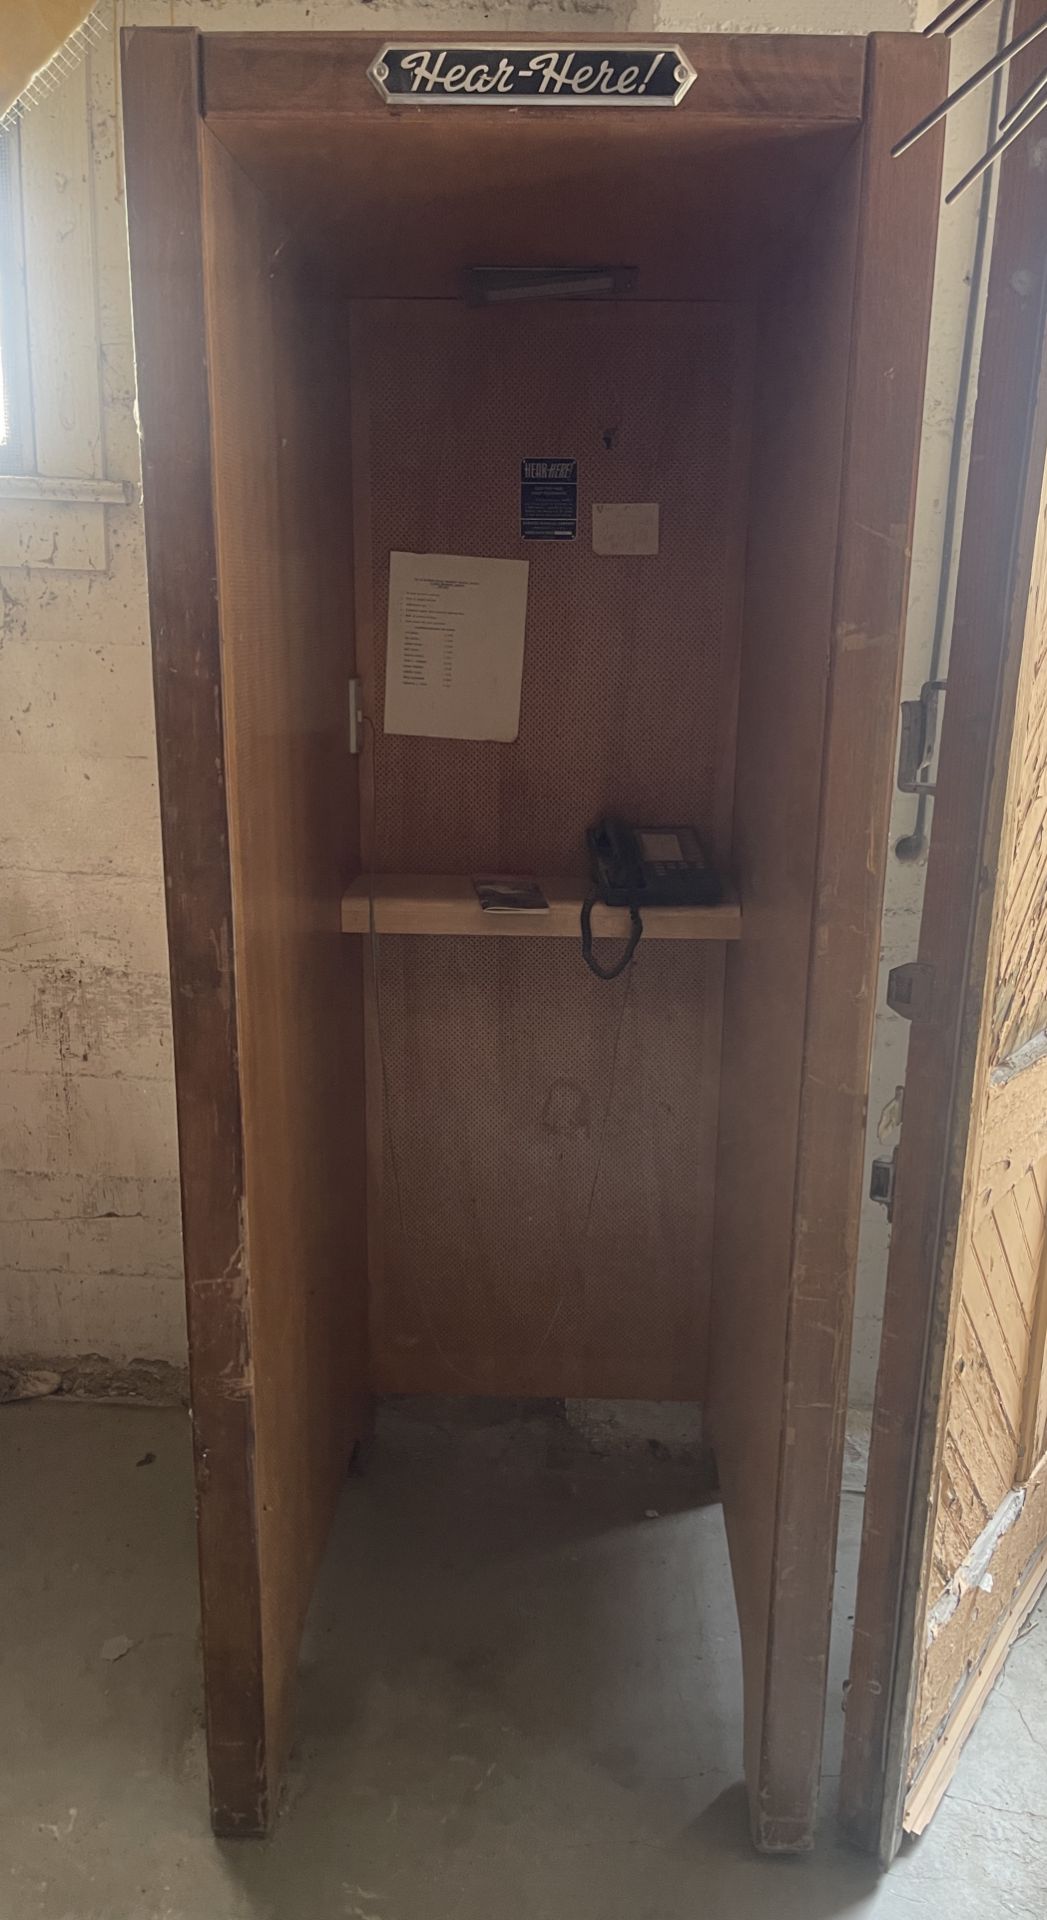 HEAR HERE PRIVATE QUIET TELEPHONE BOOTH BURGESS MANNING COMPANY ACOUSTIC BOOTH